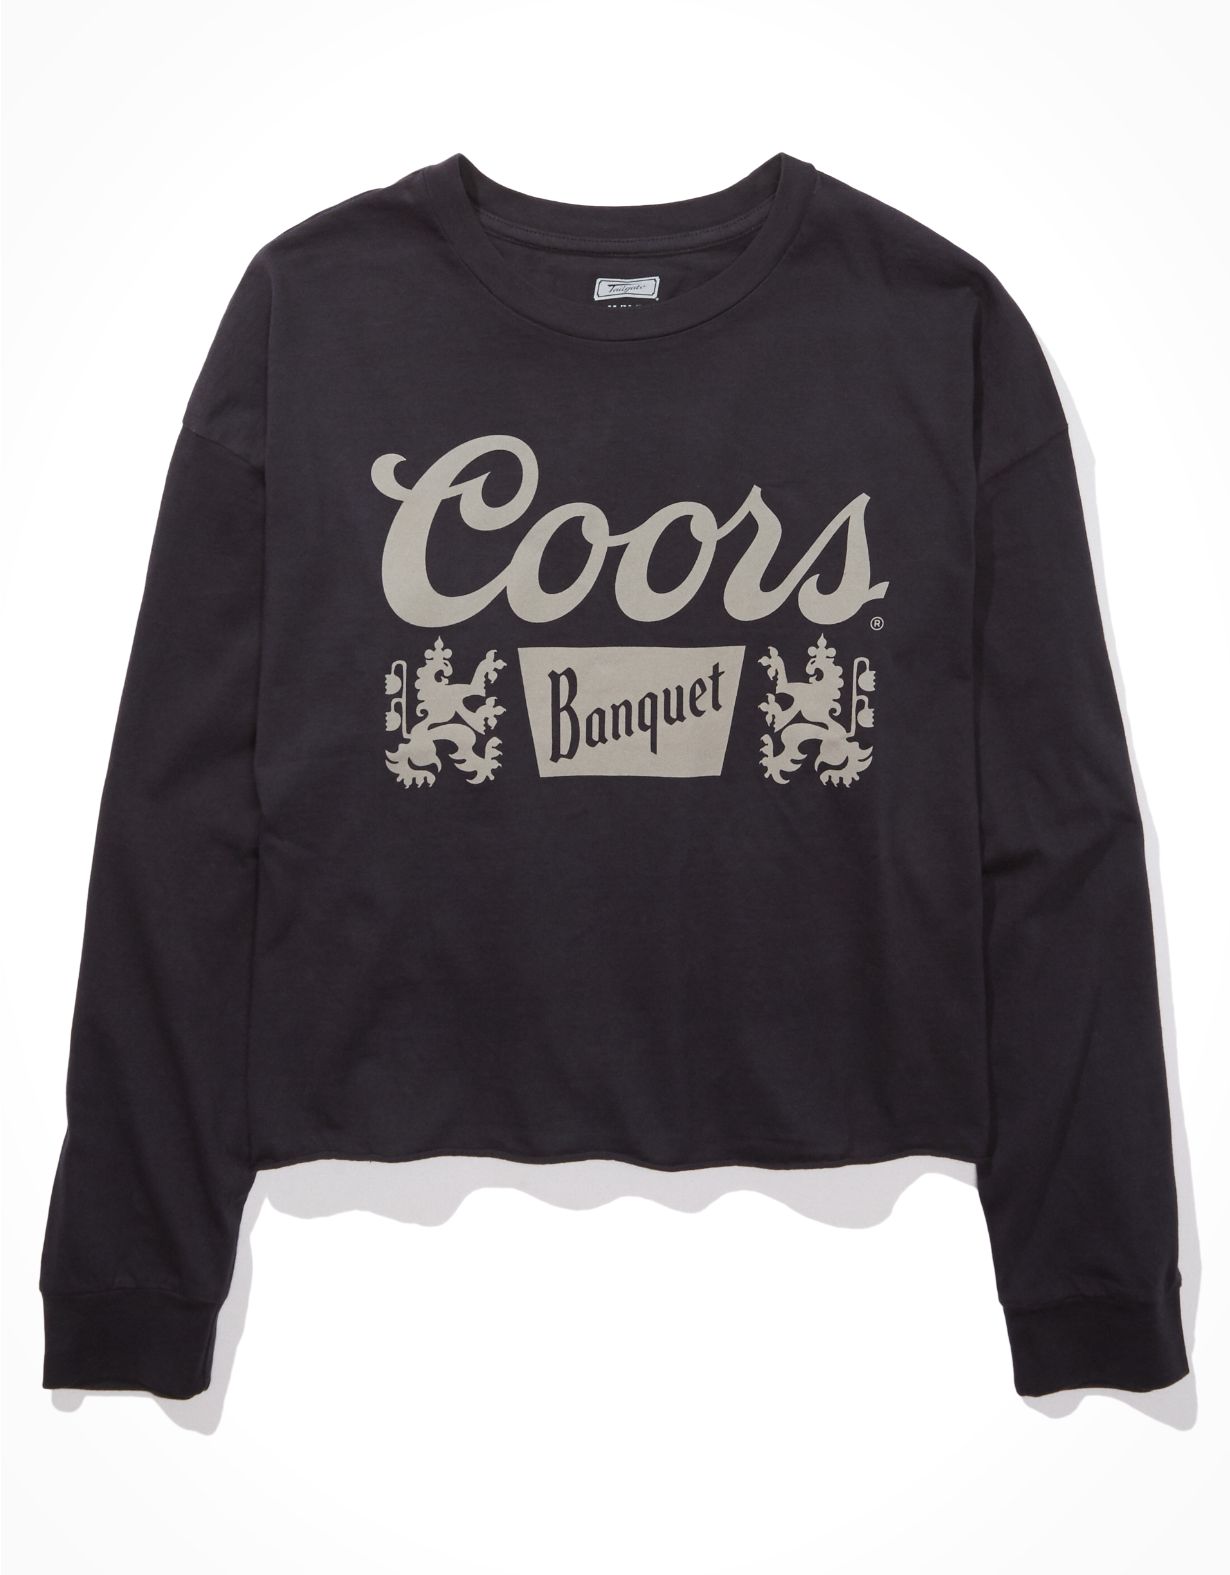 Tailgate Women's Coors Long Sleeve Cropped T-Shirt